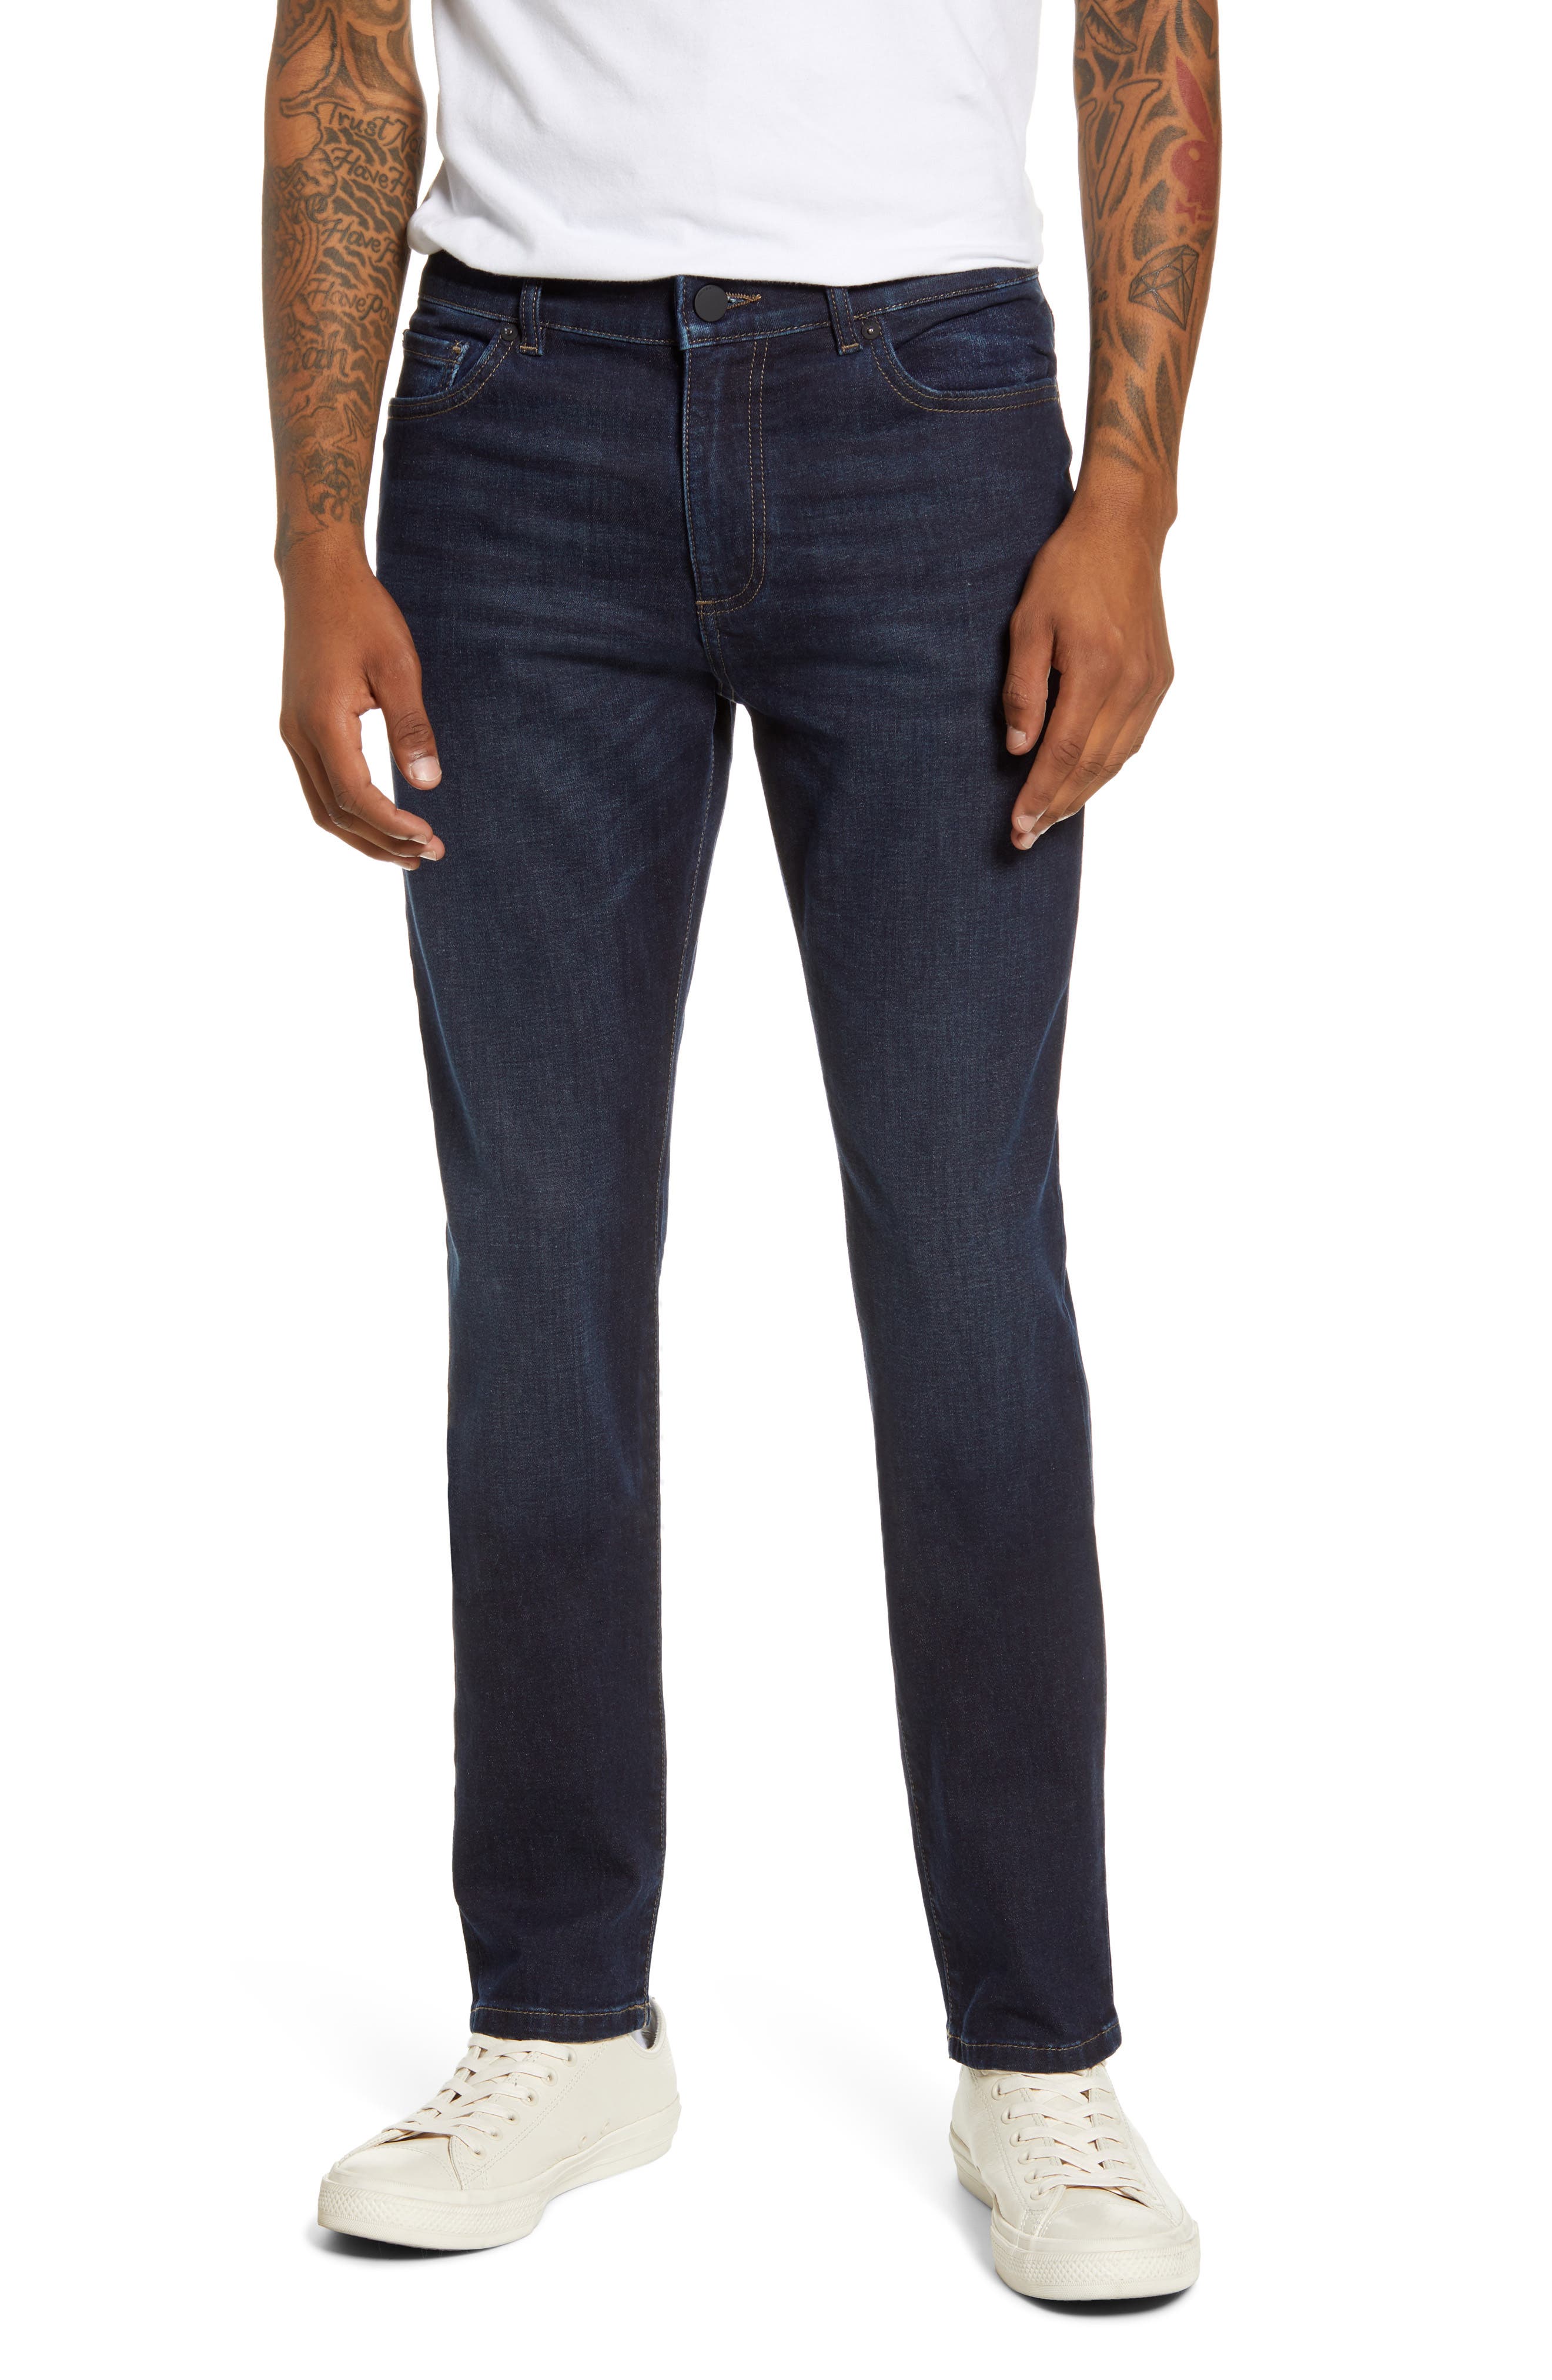 DL1961 Mens Cooper Relaxed Skinny Fit Jean in Nomad 